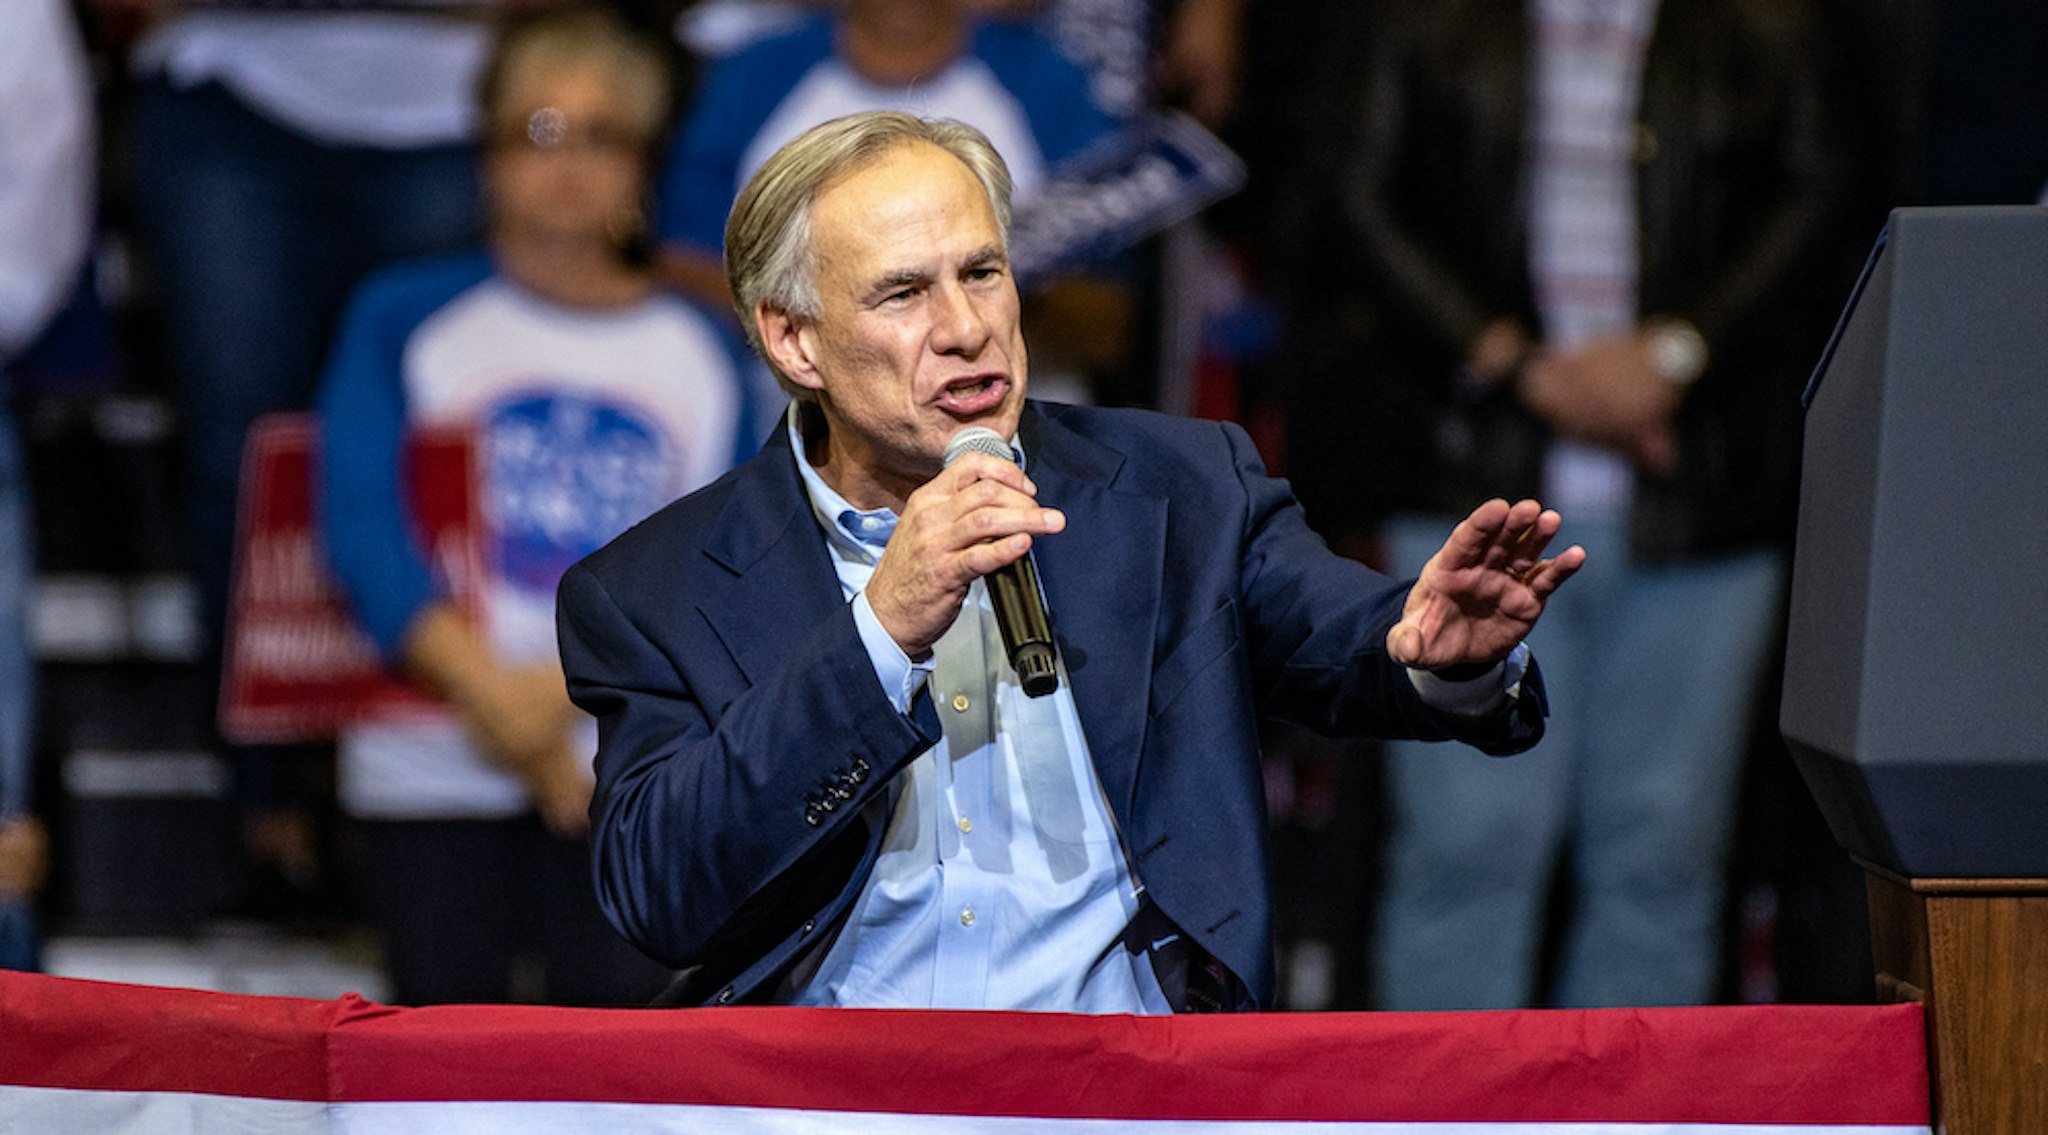 Greg Abbott, governor of Texas, speaks during a campaign rally with U.S. President Donald Trump for Senator Ted Cruz, not pictured, in Houston, Texas, U.S., on Monday, Oct. 22, 2018. Trump declared that he's a "nationalist" at the rally as he appealed to Texas Republicans to re-elect Cruz and help the party keep control of Congress. Photographer: Sergio Flores/Bloomberg